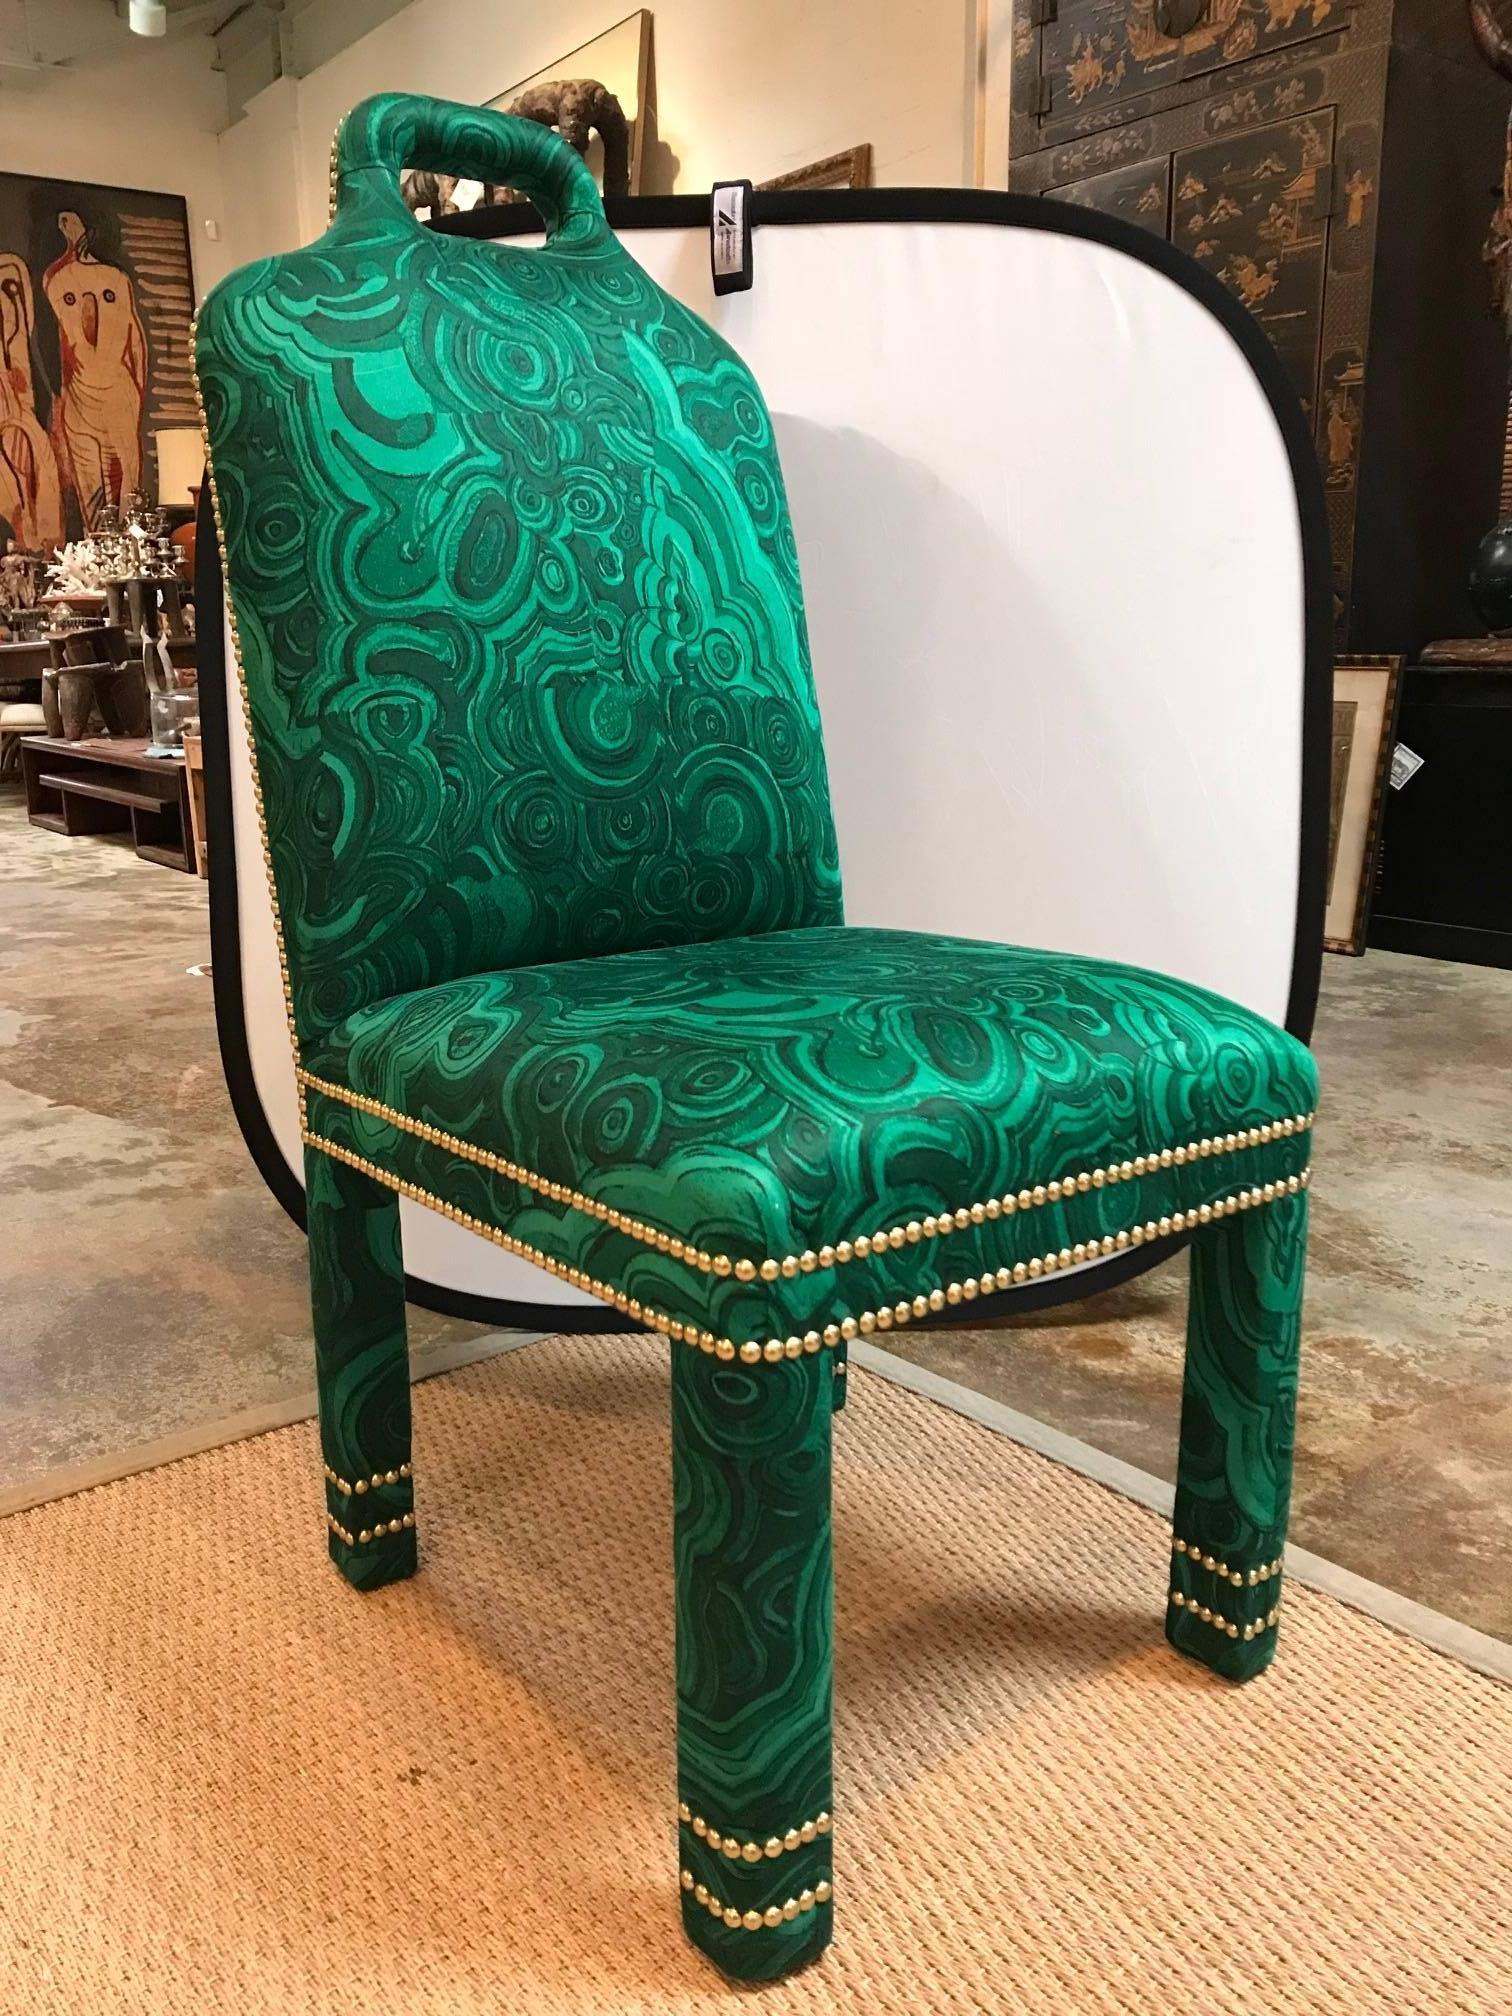 Custom designed side chair by Michelle Nussbaumer. 
Upholstered and nail trim details.
Open area at top back.